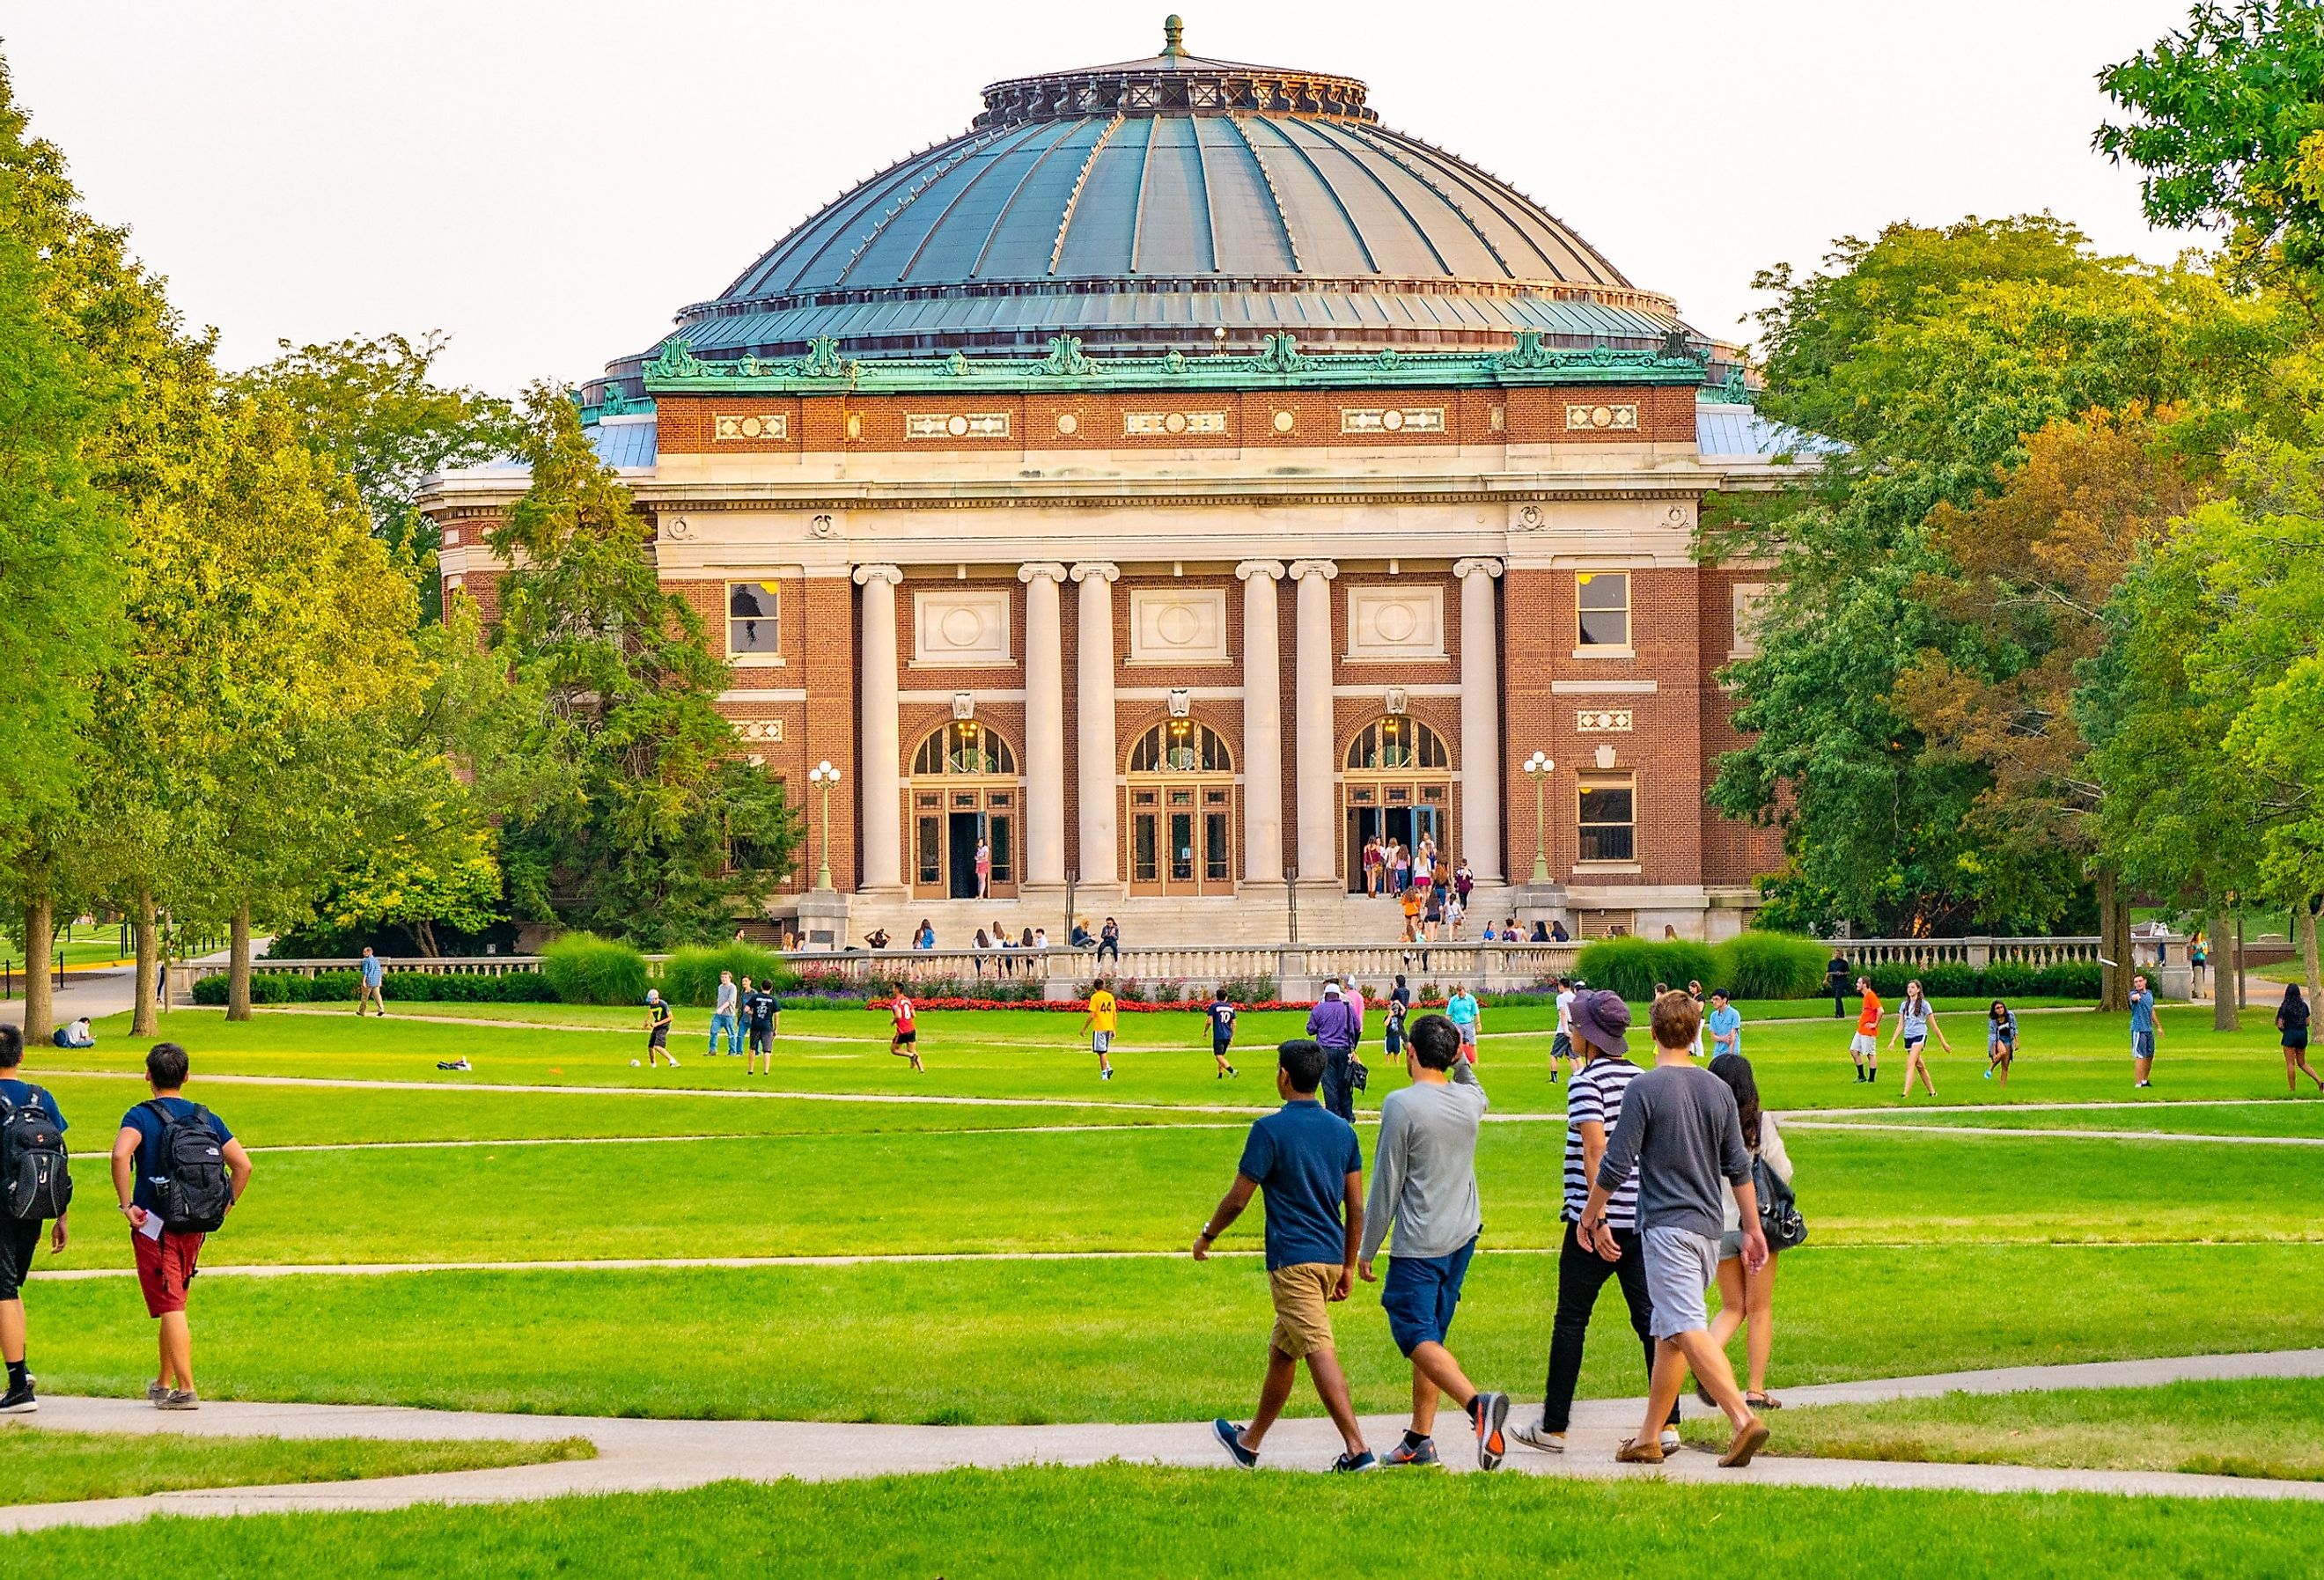 College students walk on the quad lawn of the University of Illinois campus in Urbana, Illinois.